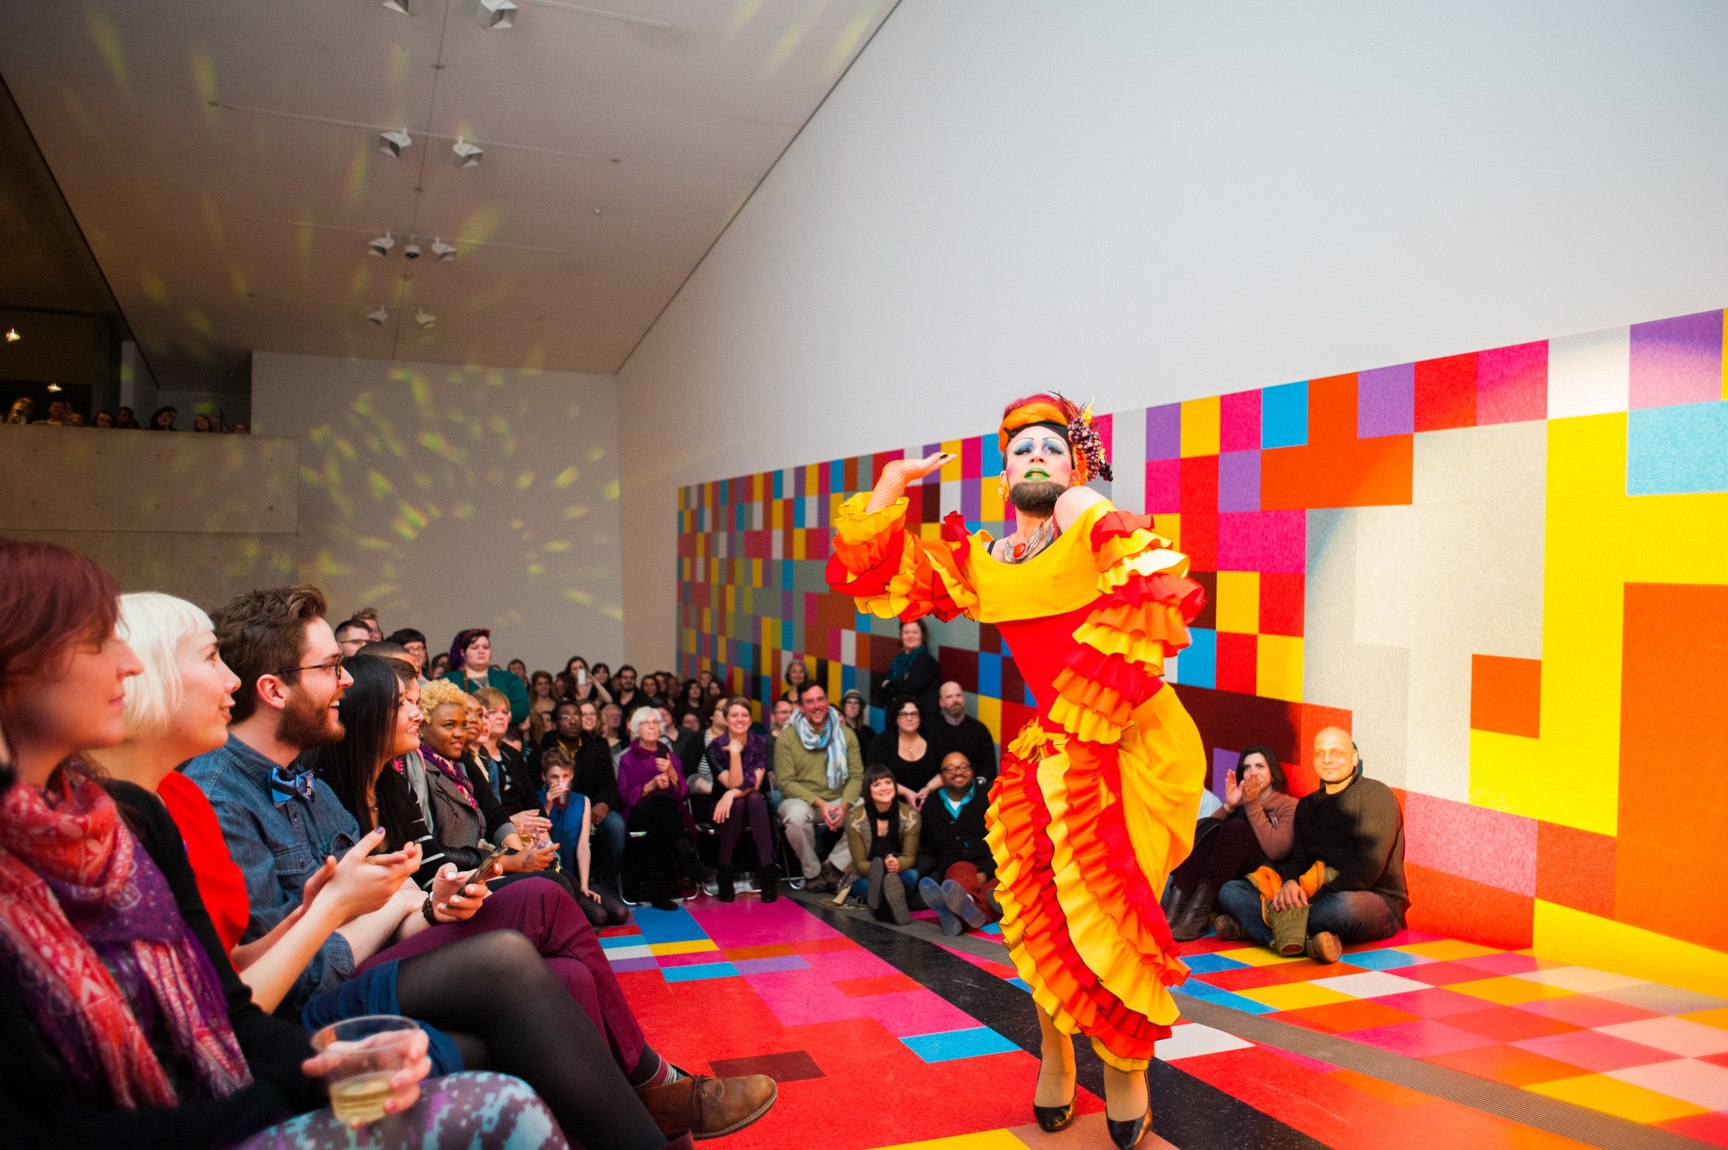 Pinko performs wearing a bright orange and yellow dress in front of David Scanavino's installation "Candy Crush" for a large audience in the Main Gallery.